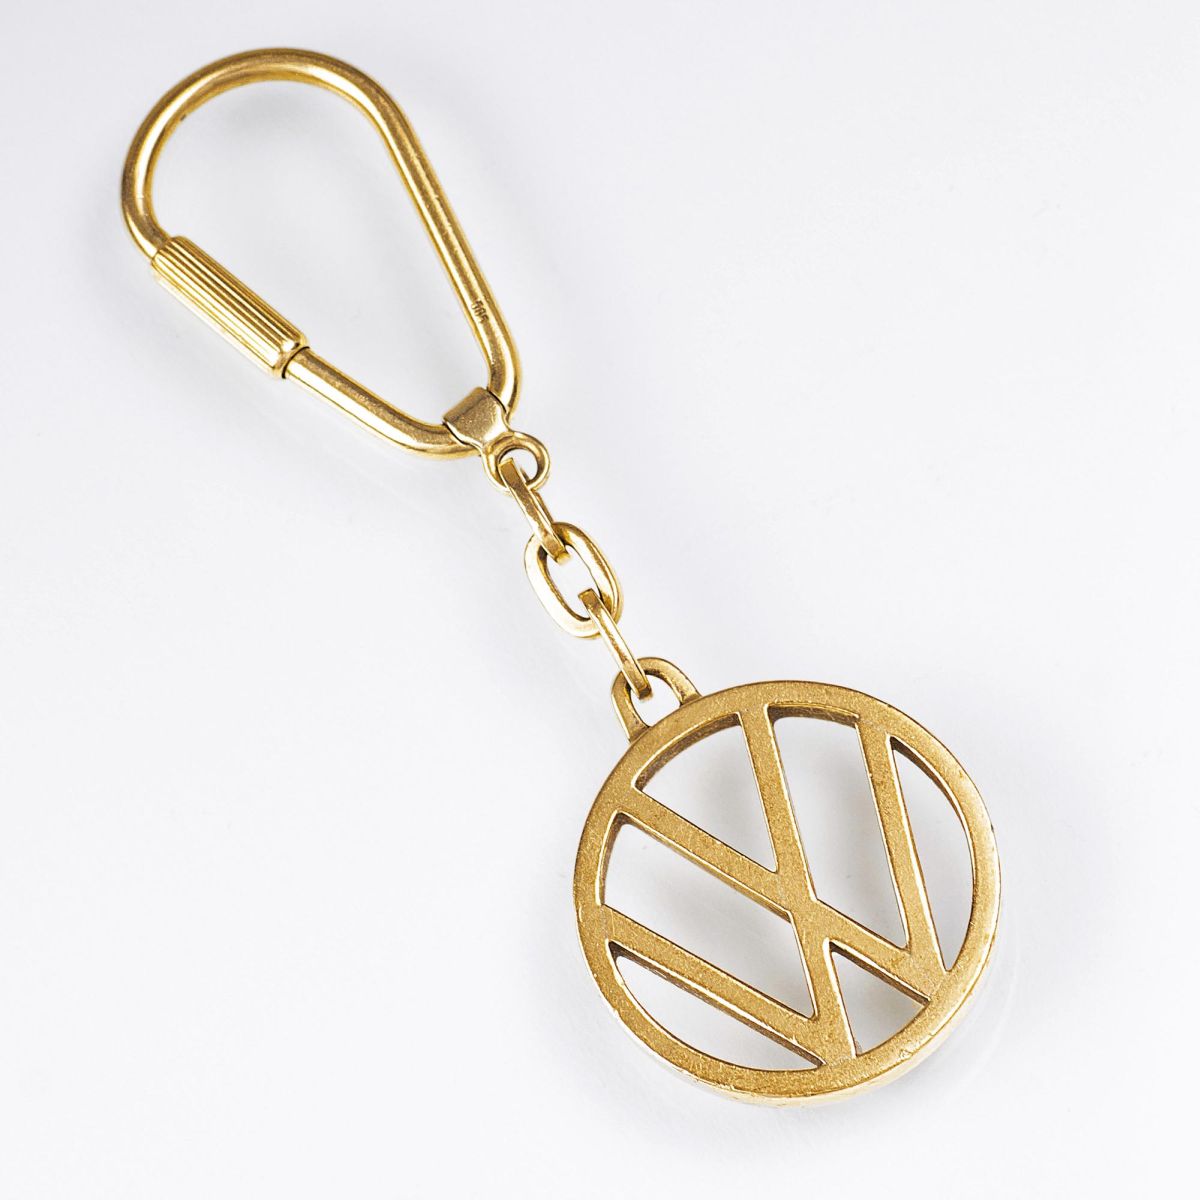 A Gold Key Ring with Volkswagen Emblem 'VW'